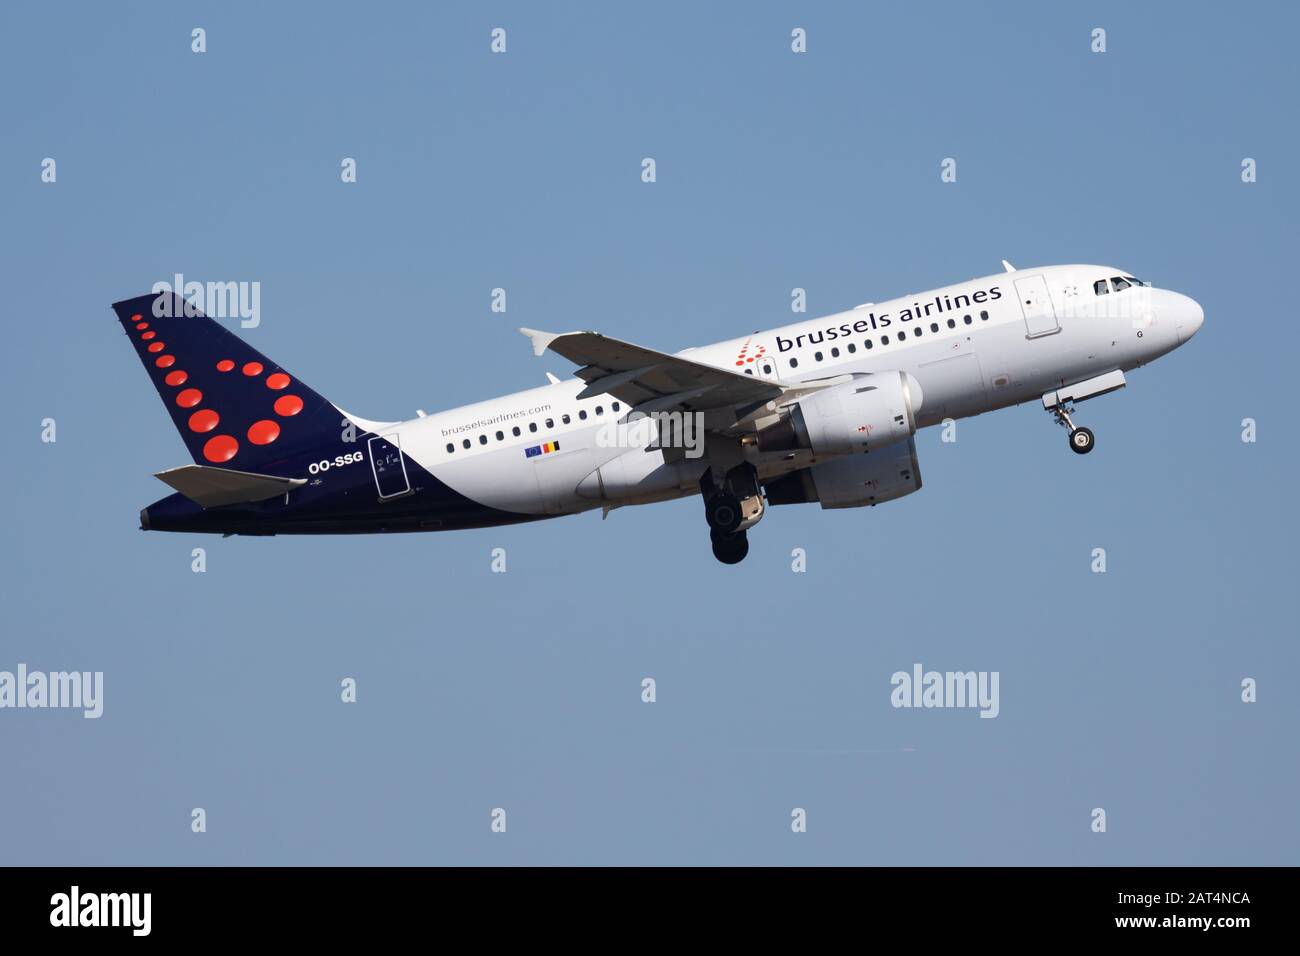 Budapest / Hungary - October 14, 2018: Brussels Airlines Airbus A319 OO-SSG passenger plane departure and take off at Budapest Airport Stock Photo